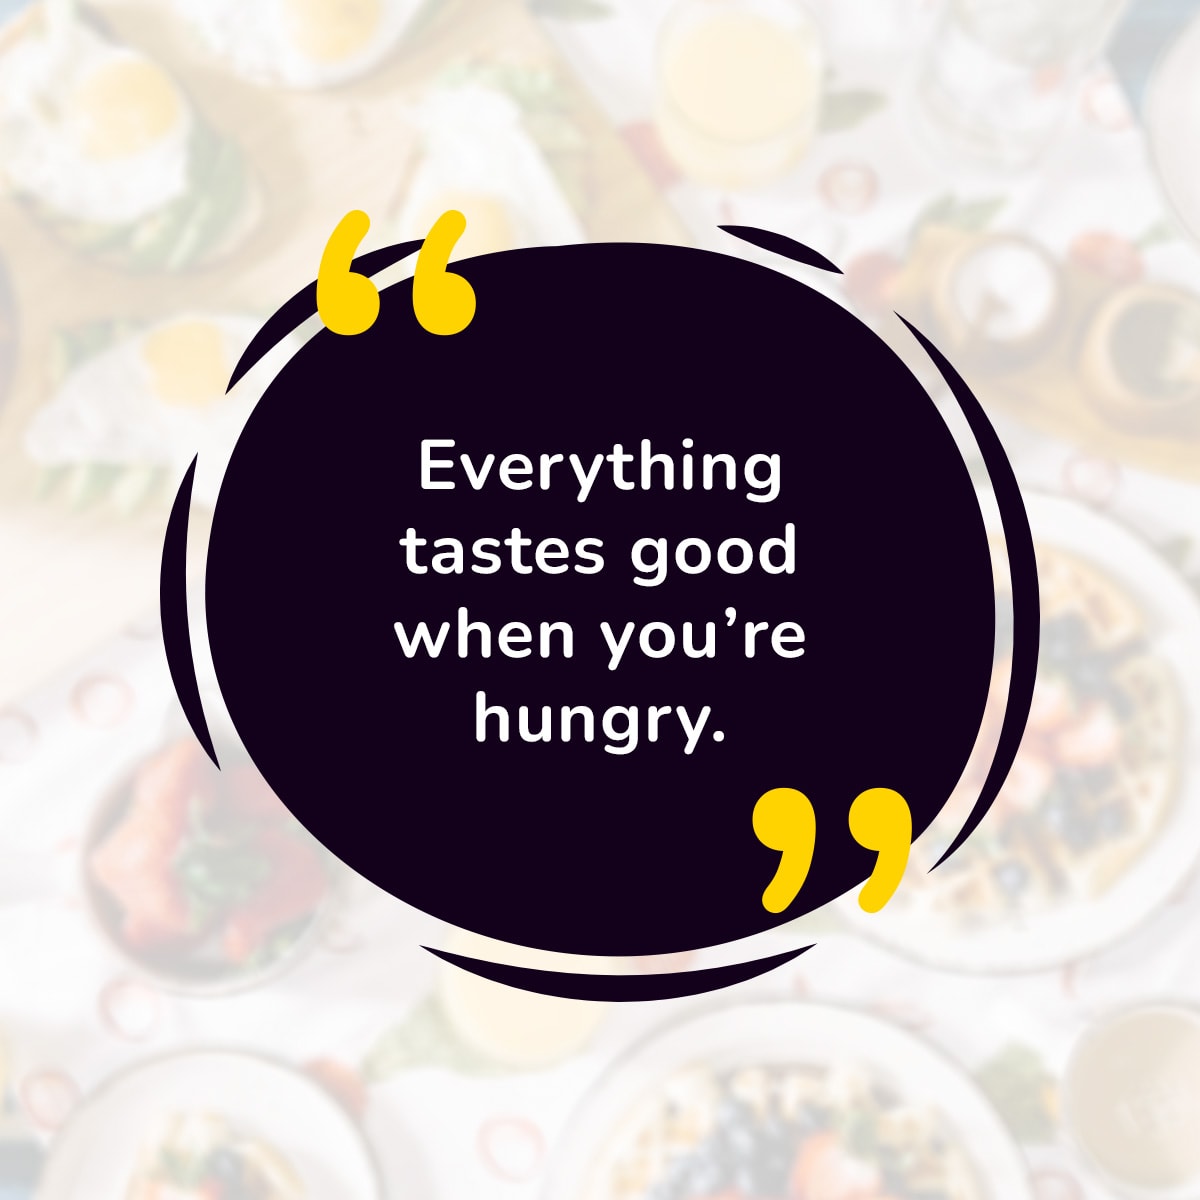 Everything tastes good when you're hungry.